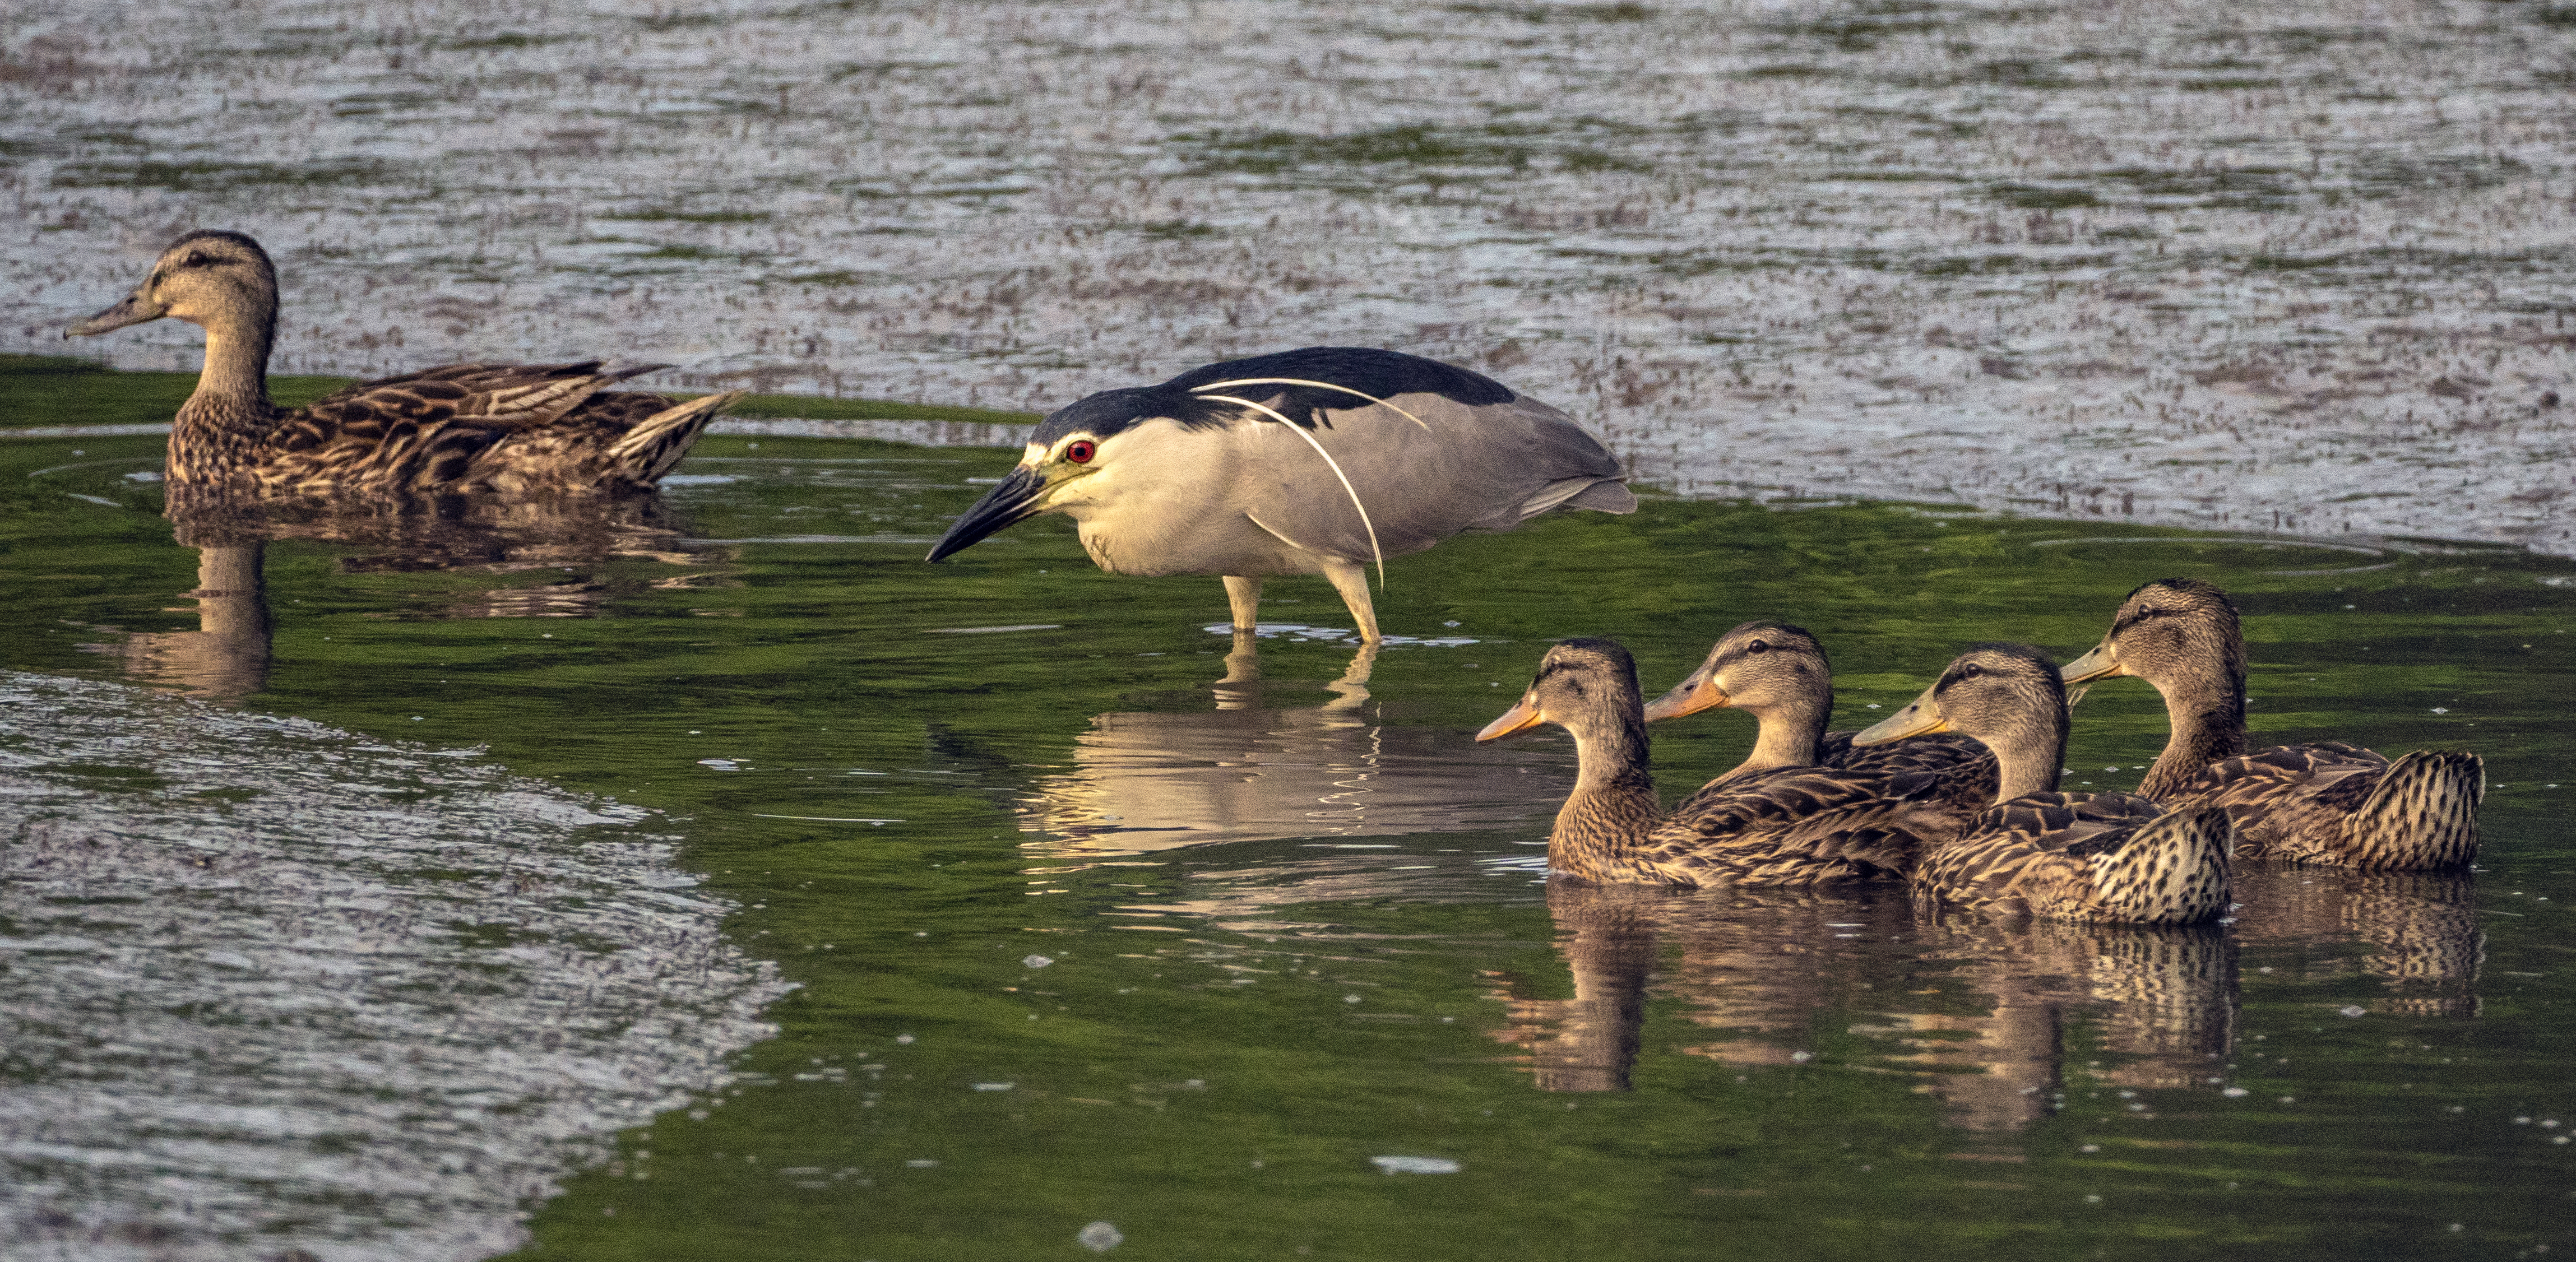 A Black-crowned Night-Heron feeds searches for prey among a family of Mallards in Inwood Hill Park. <a href="https://www.flickr.com/photos/steveguttman/43437659622/" target="_blank">Photo</a>: Steve Guttman/<a href="https://creativecommons.org/licenses/by-nc-nd/2.0/" target="_blank">CC BY-NC-ND 2.0</a>